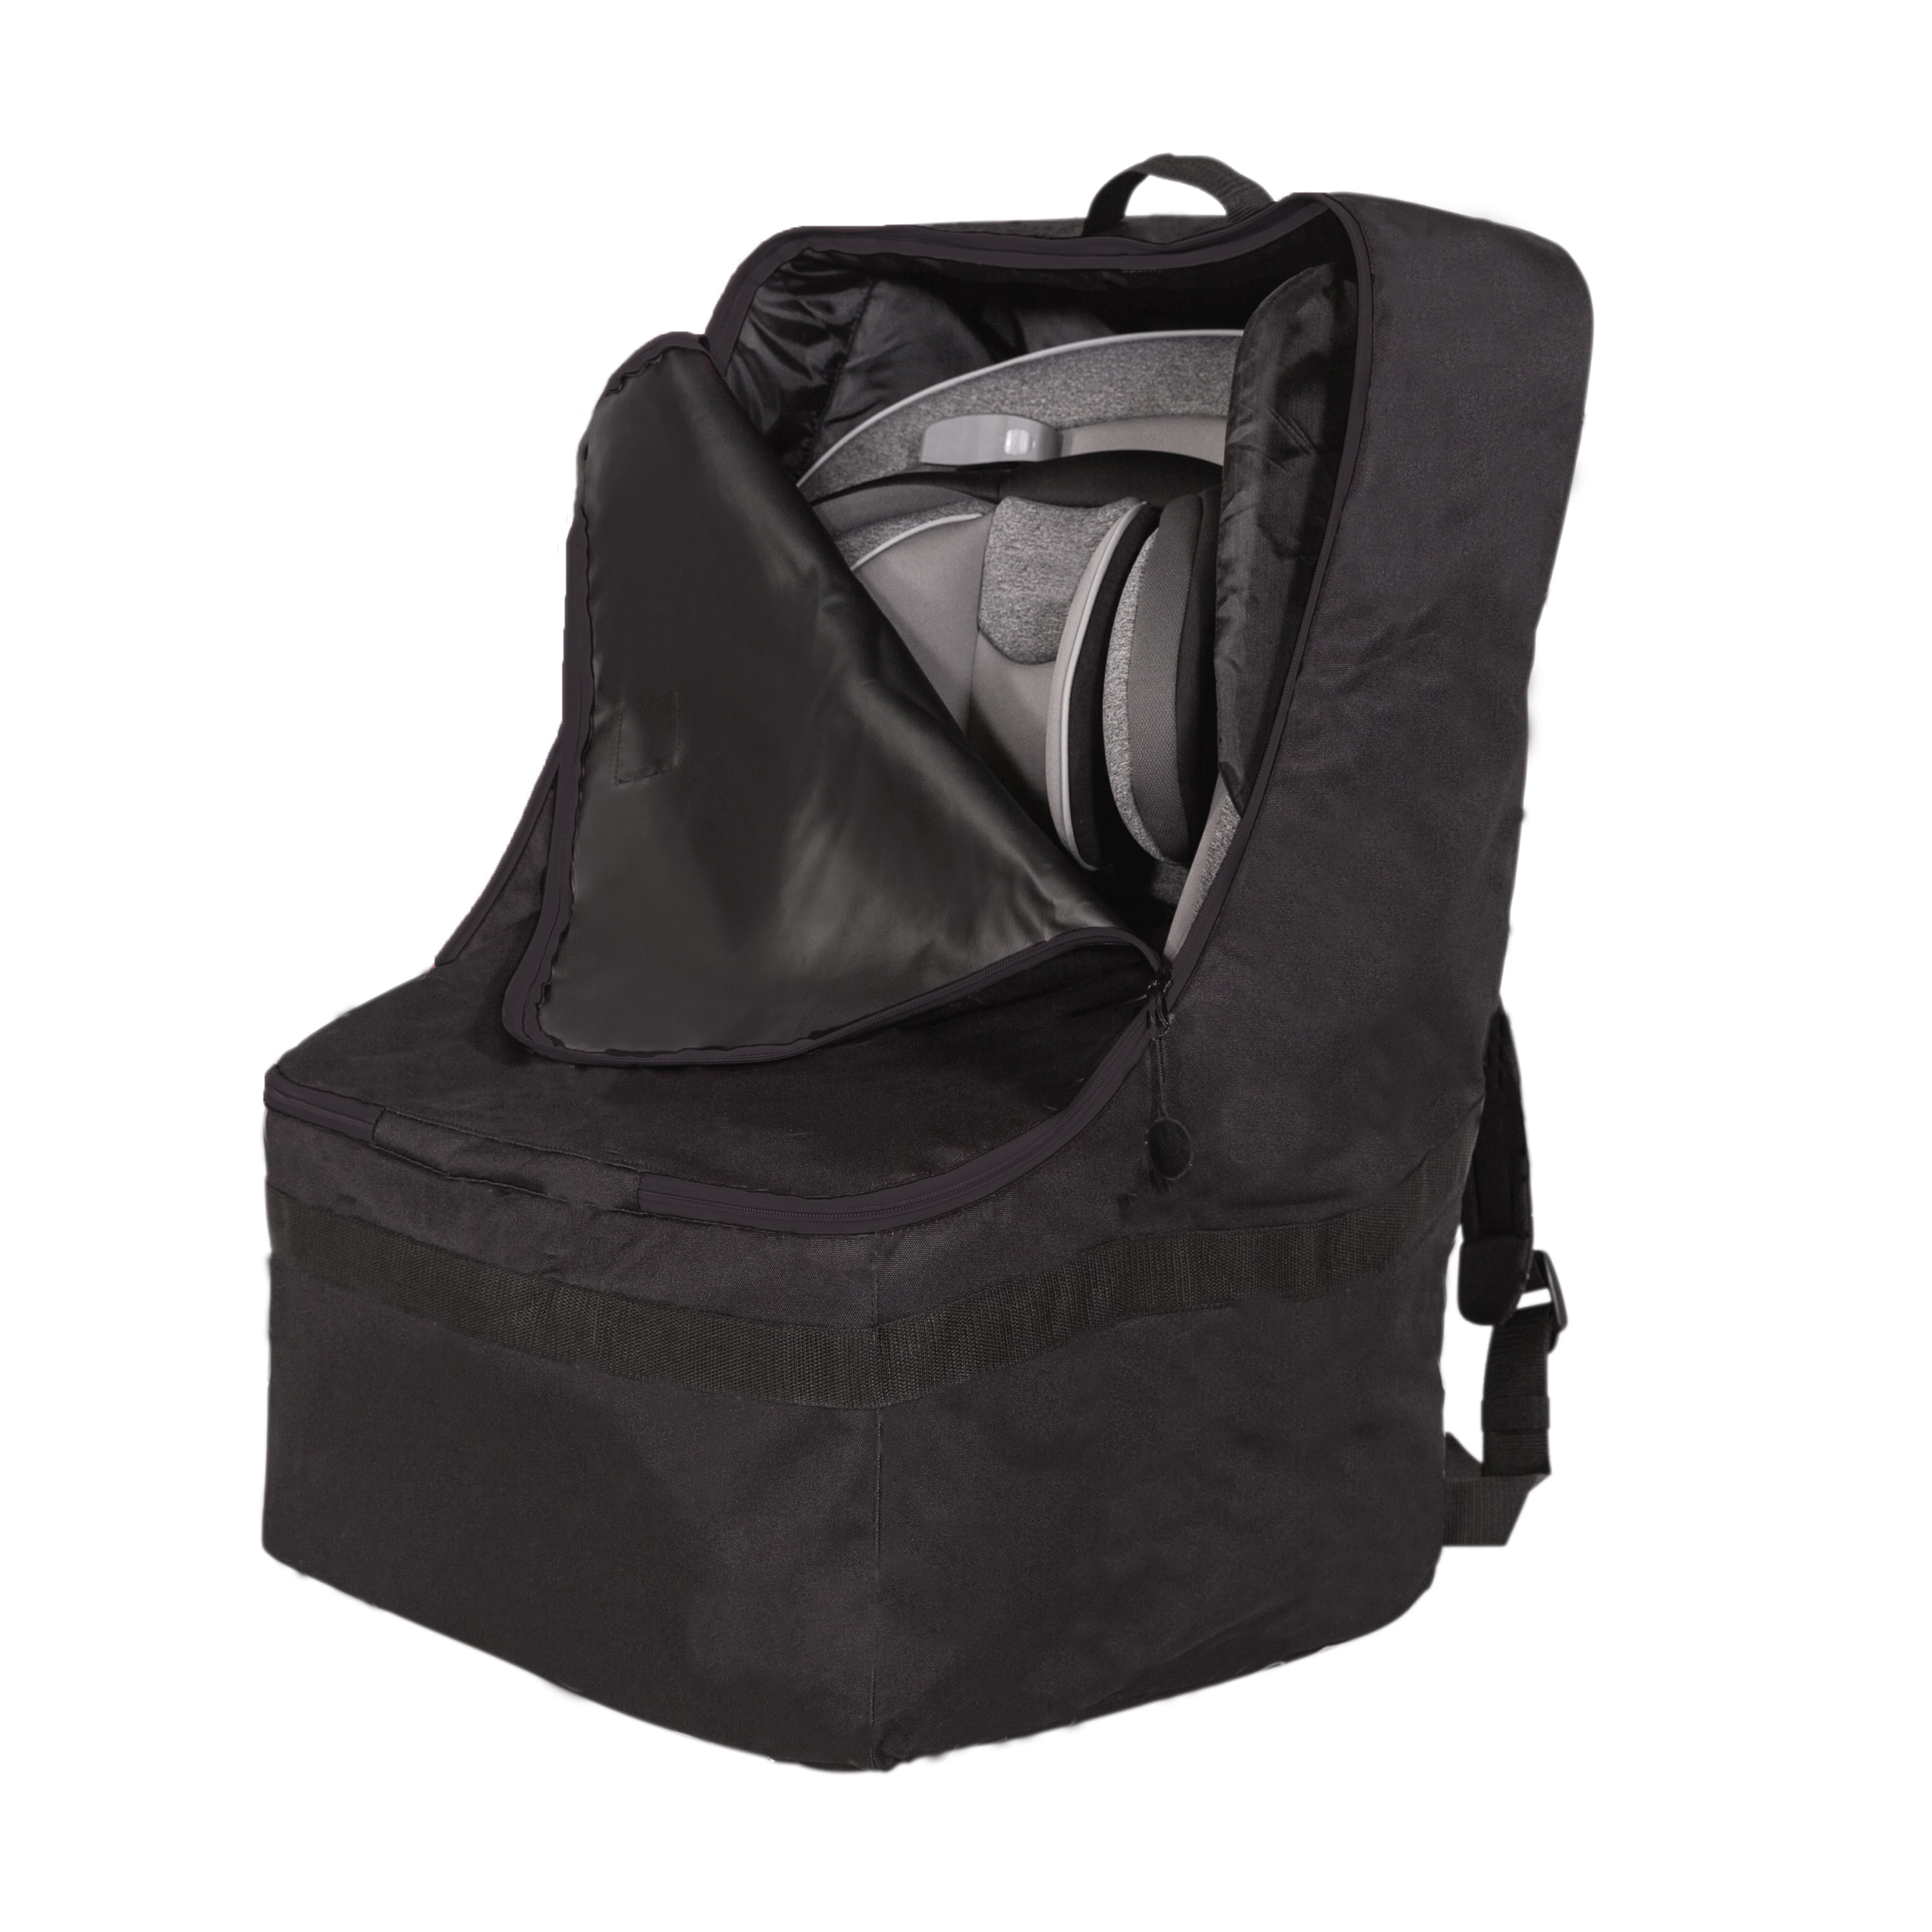 britax holiday double travel bag